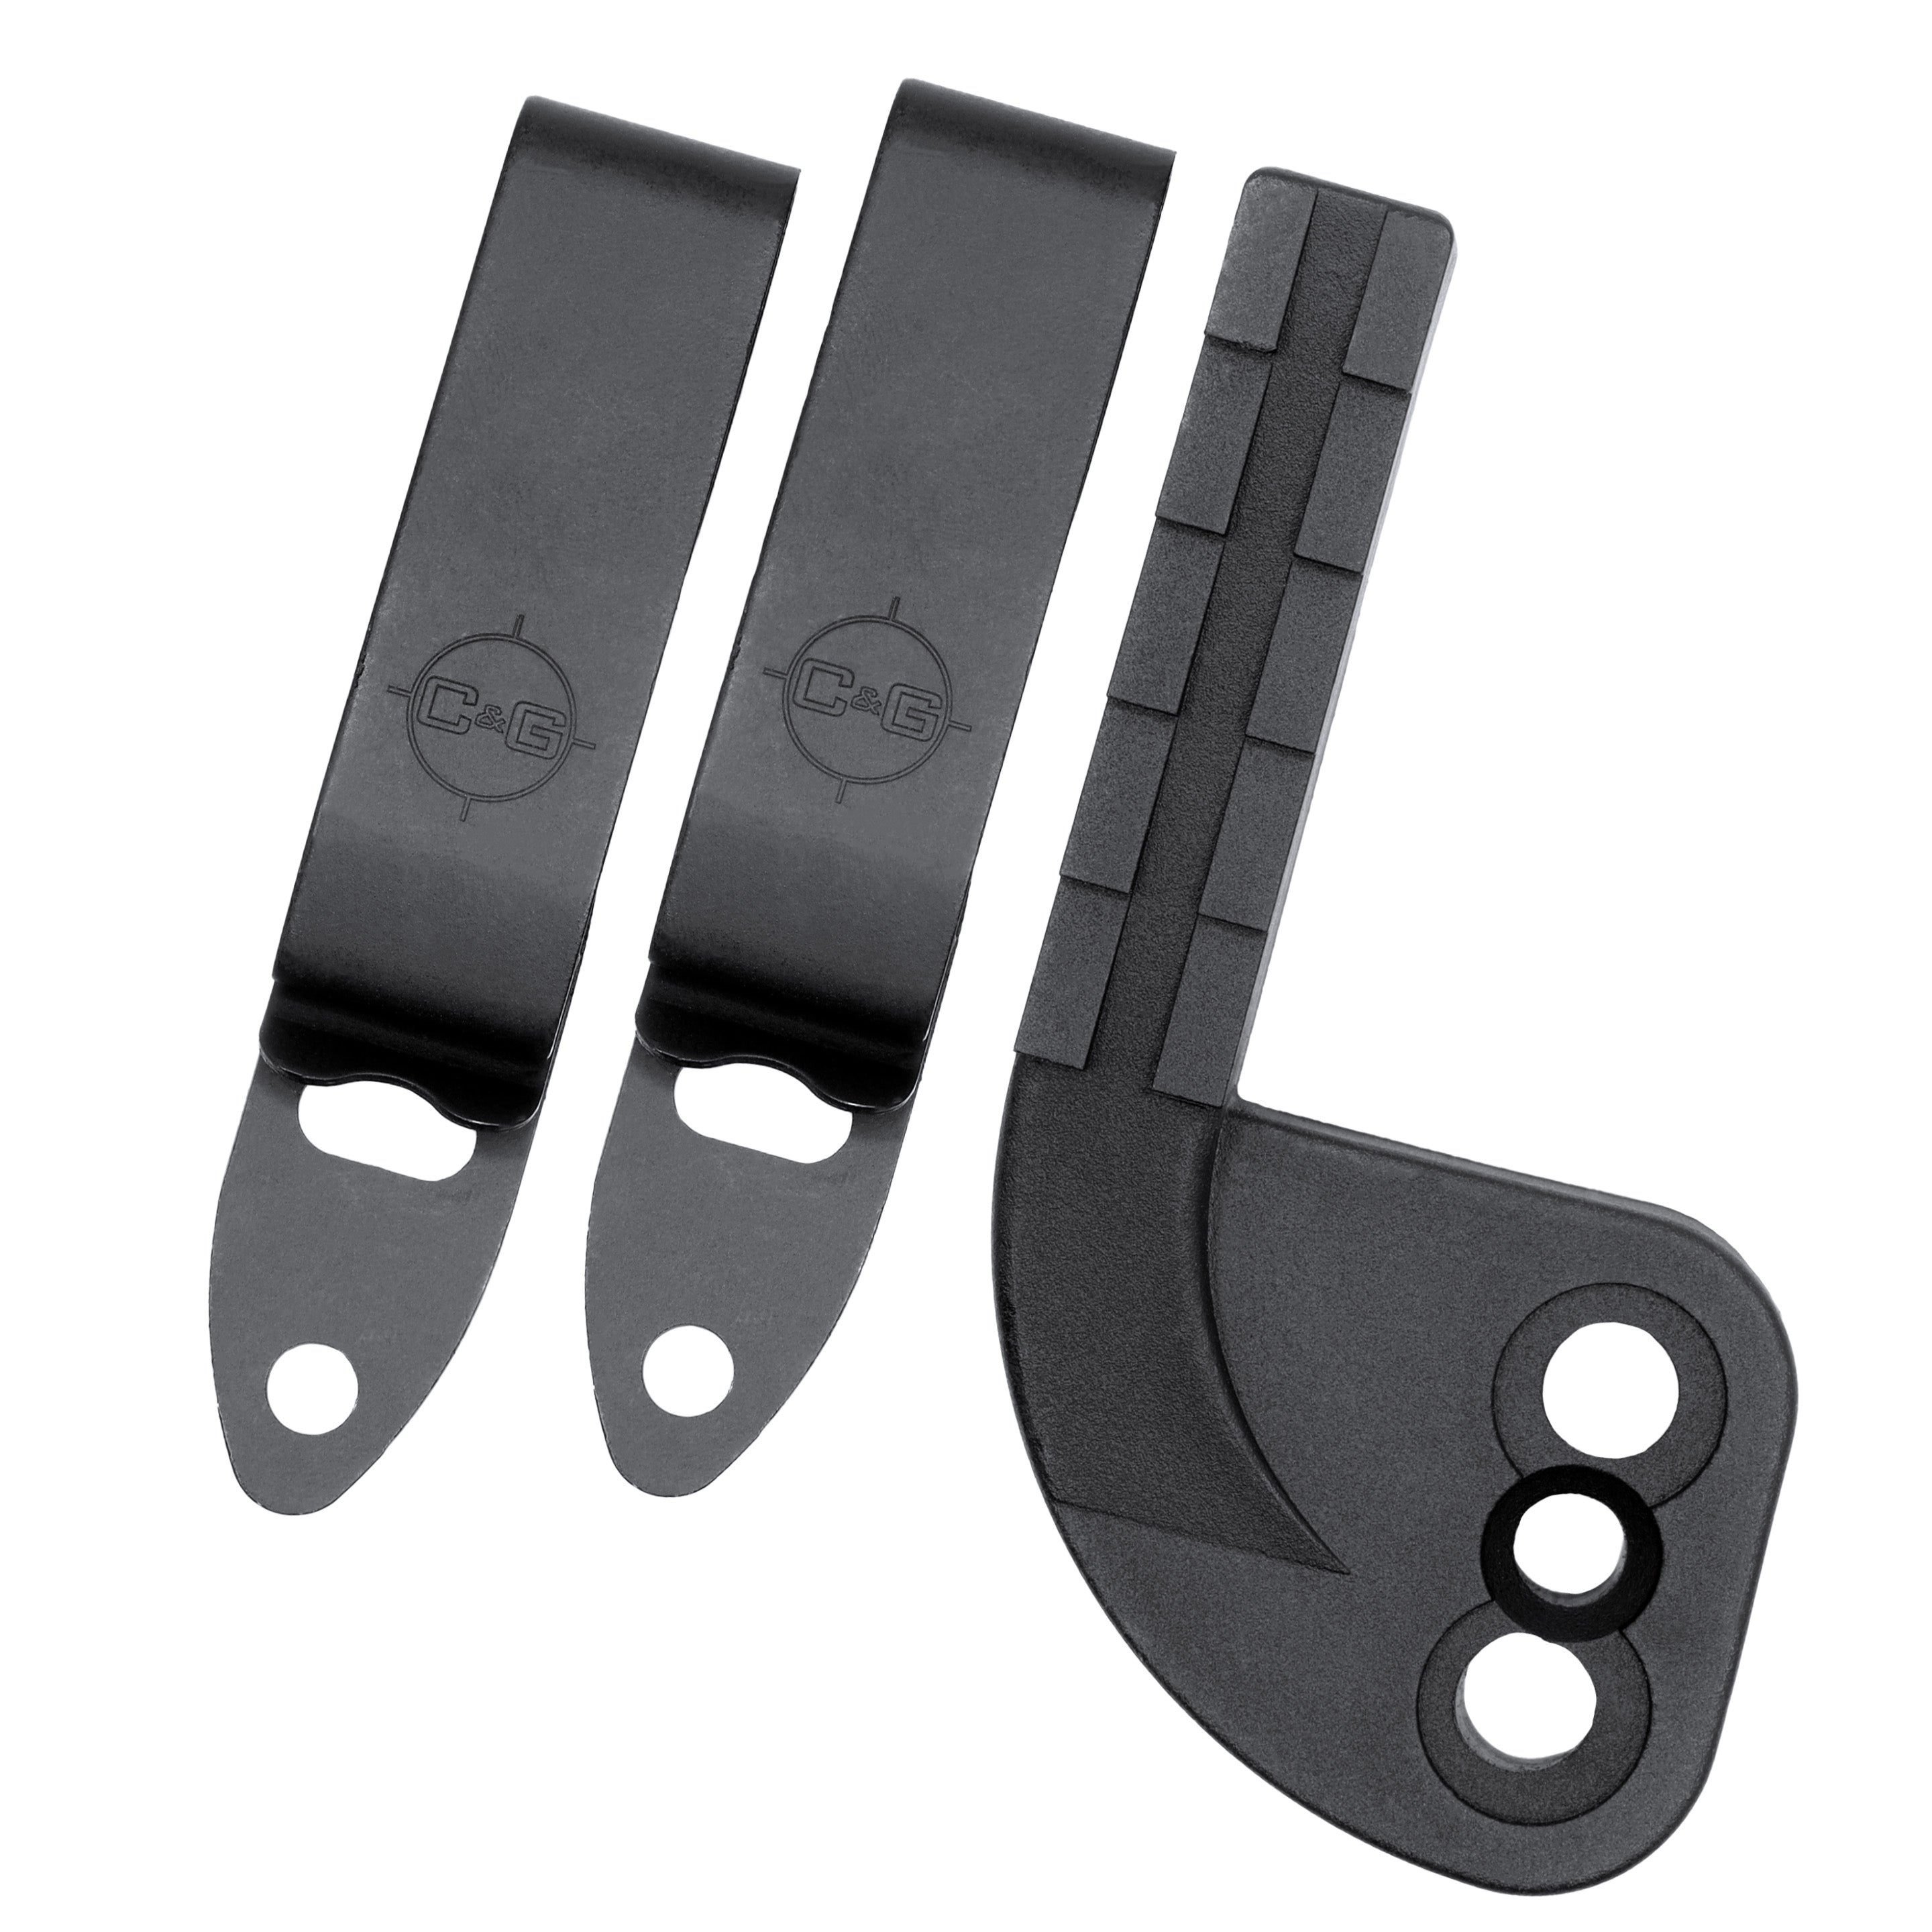 CNG IWB Metal Belt Clips | Attachment | C&G Holsters 1.75 CNG Metal Belt Clips (Set of 2)